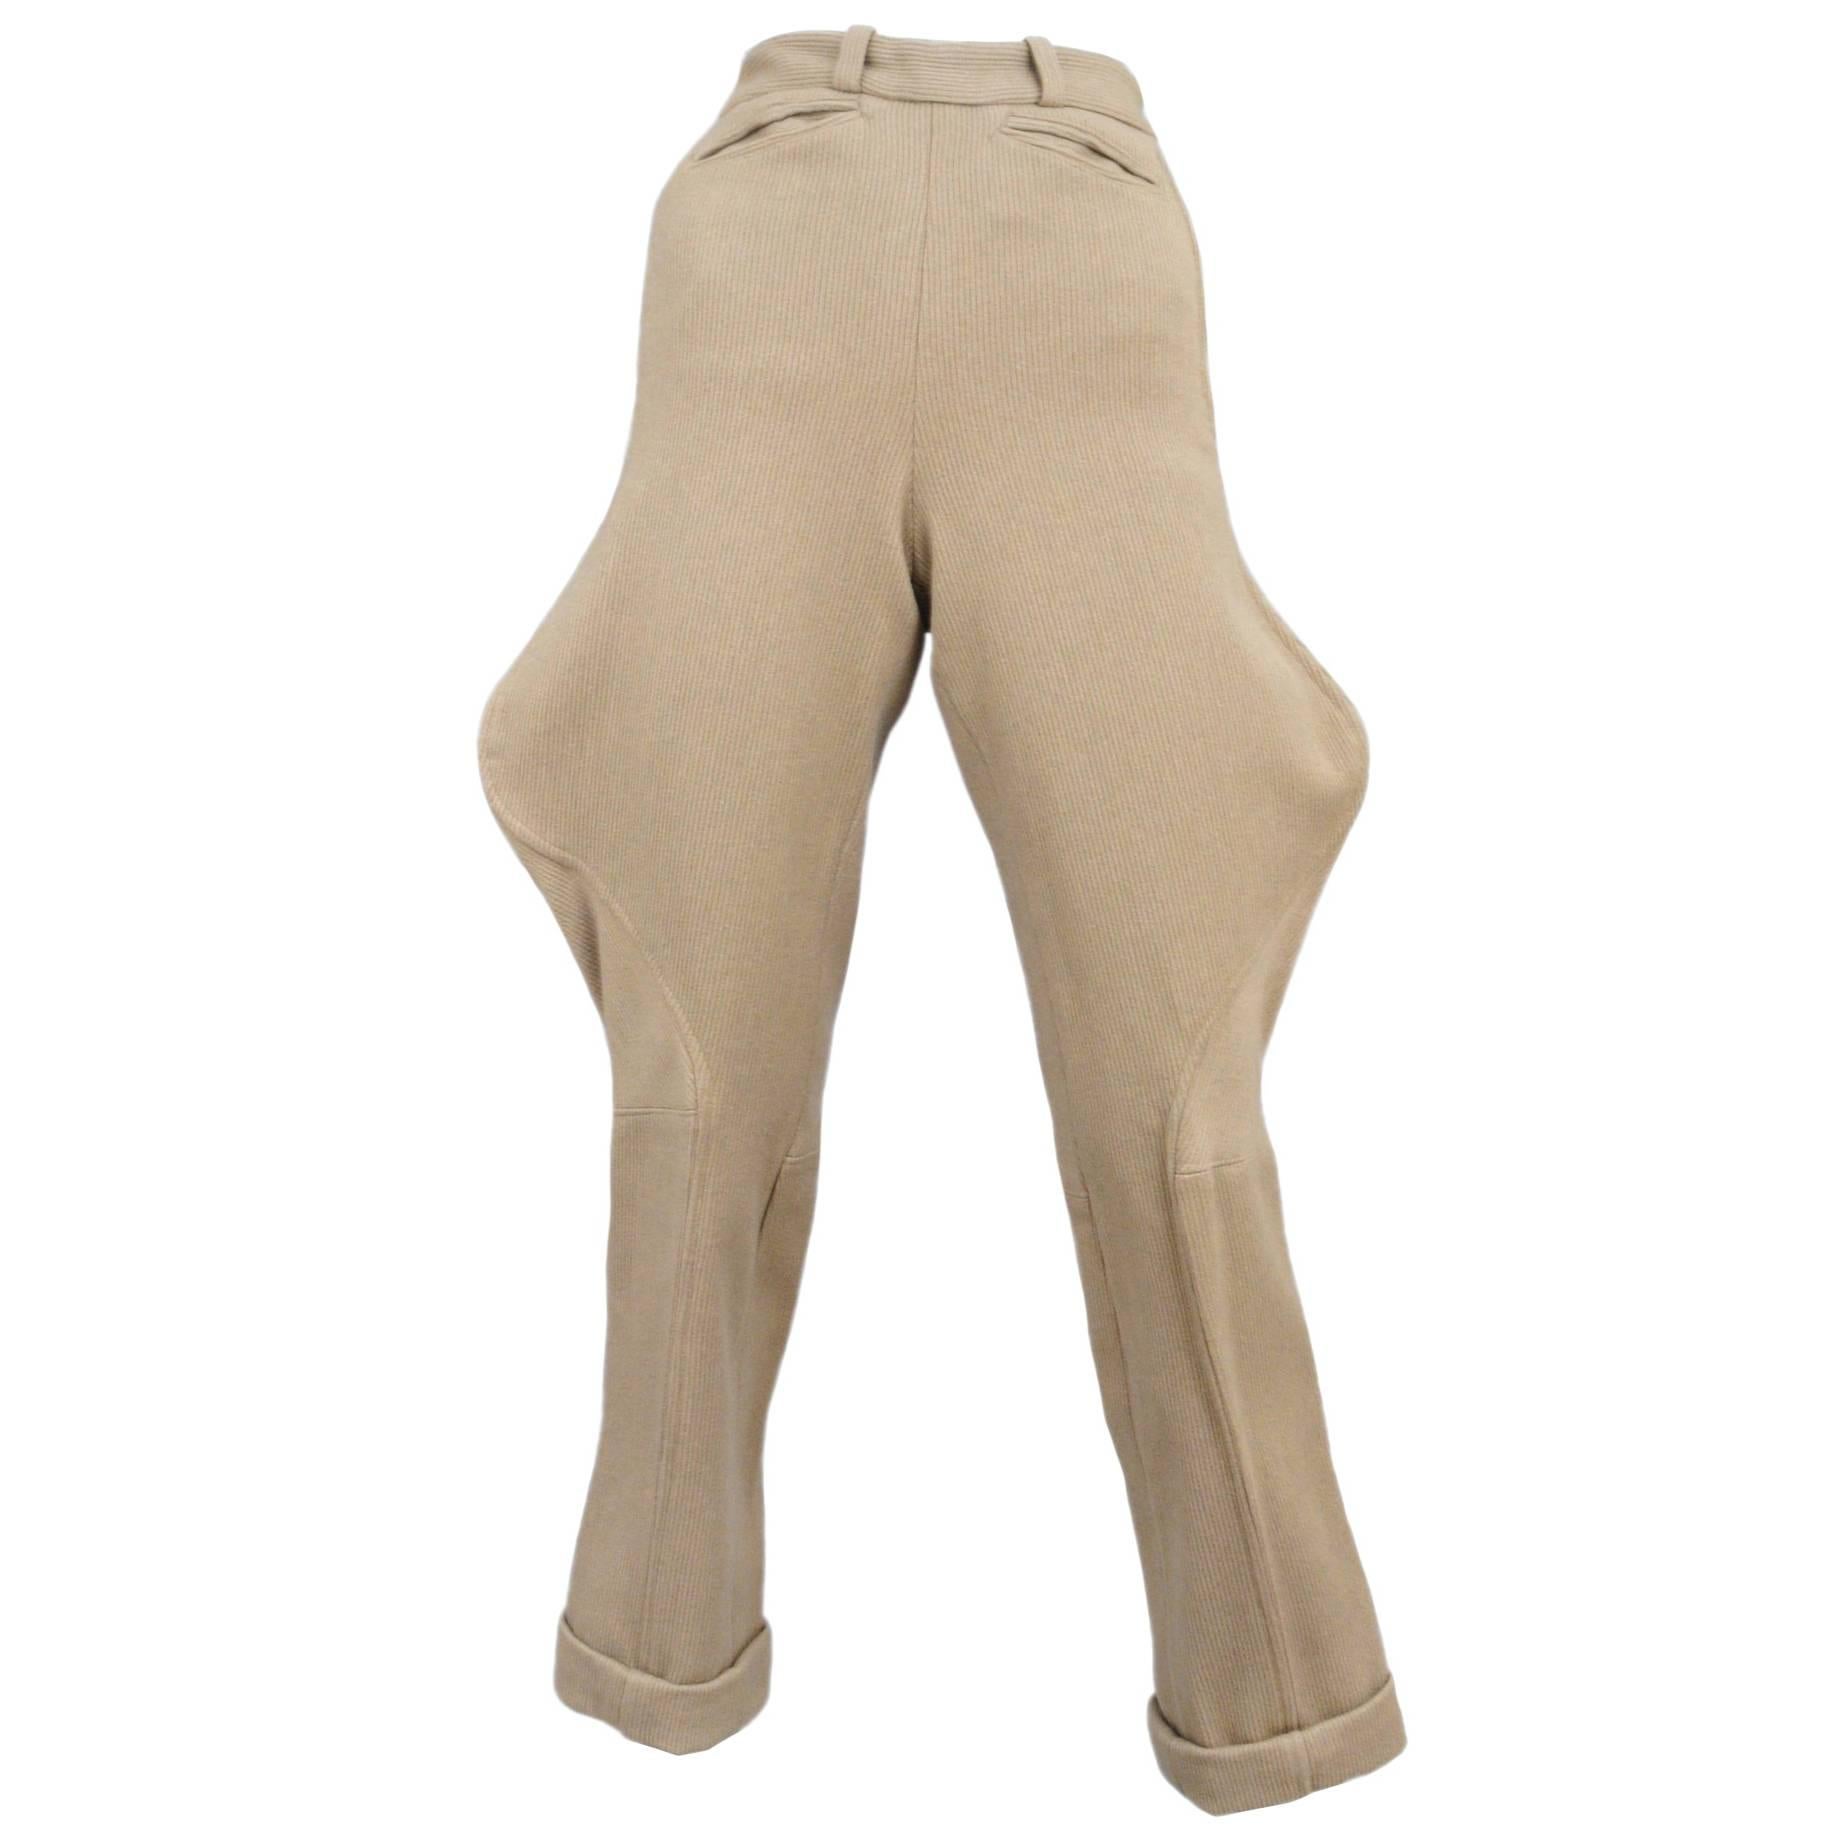 Vintage Chanel taupe ribbed wool jodhpurs featuring front welt pockets and brass studs at the back calfs.

Please contact us for additional photos.